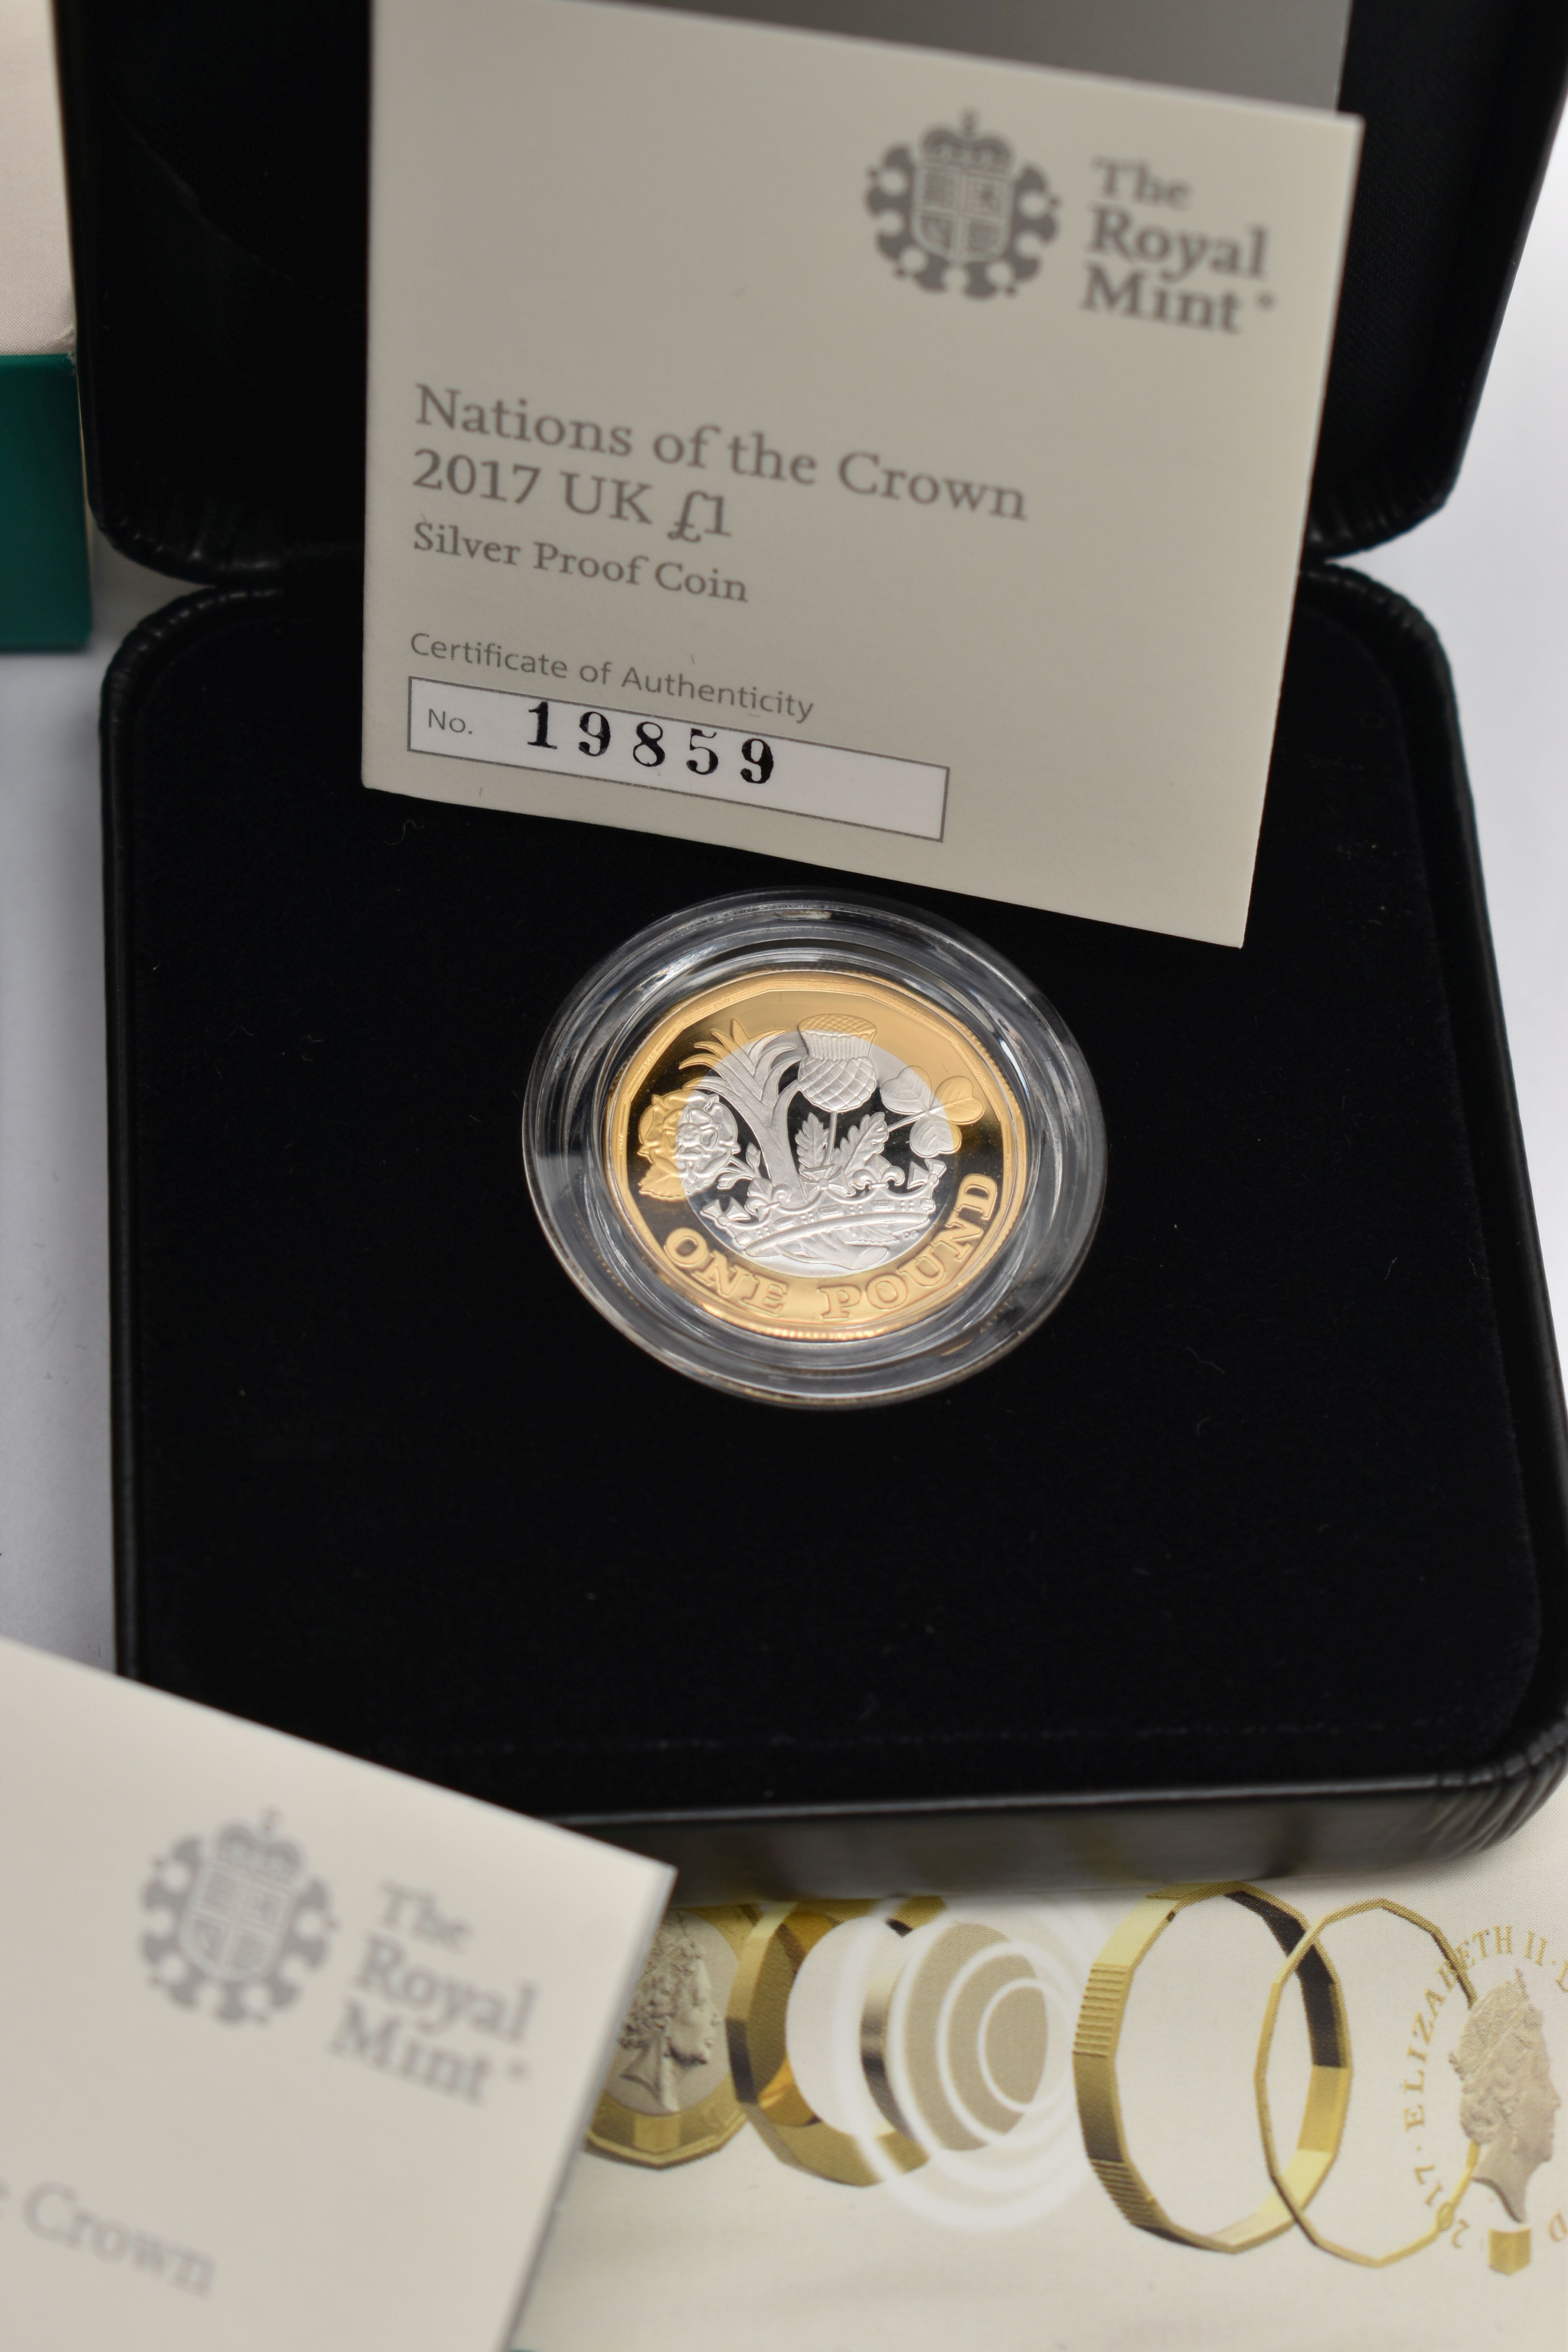 BOXED ROYAL MINT COINS, to include two 'Nations of the Crown 2017 UK £1 Silver Proof coin' numbers - Image 2 of 4